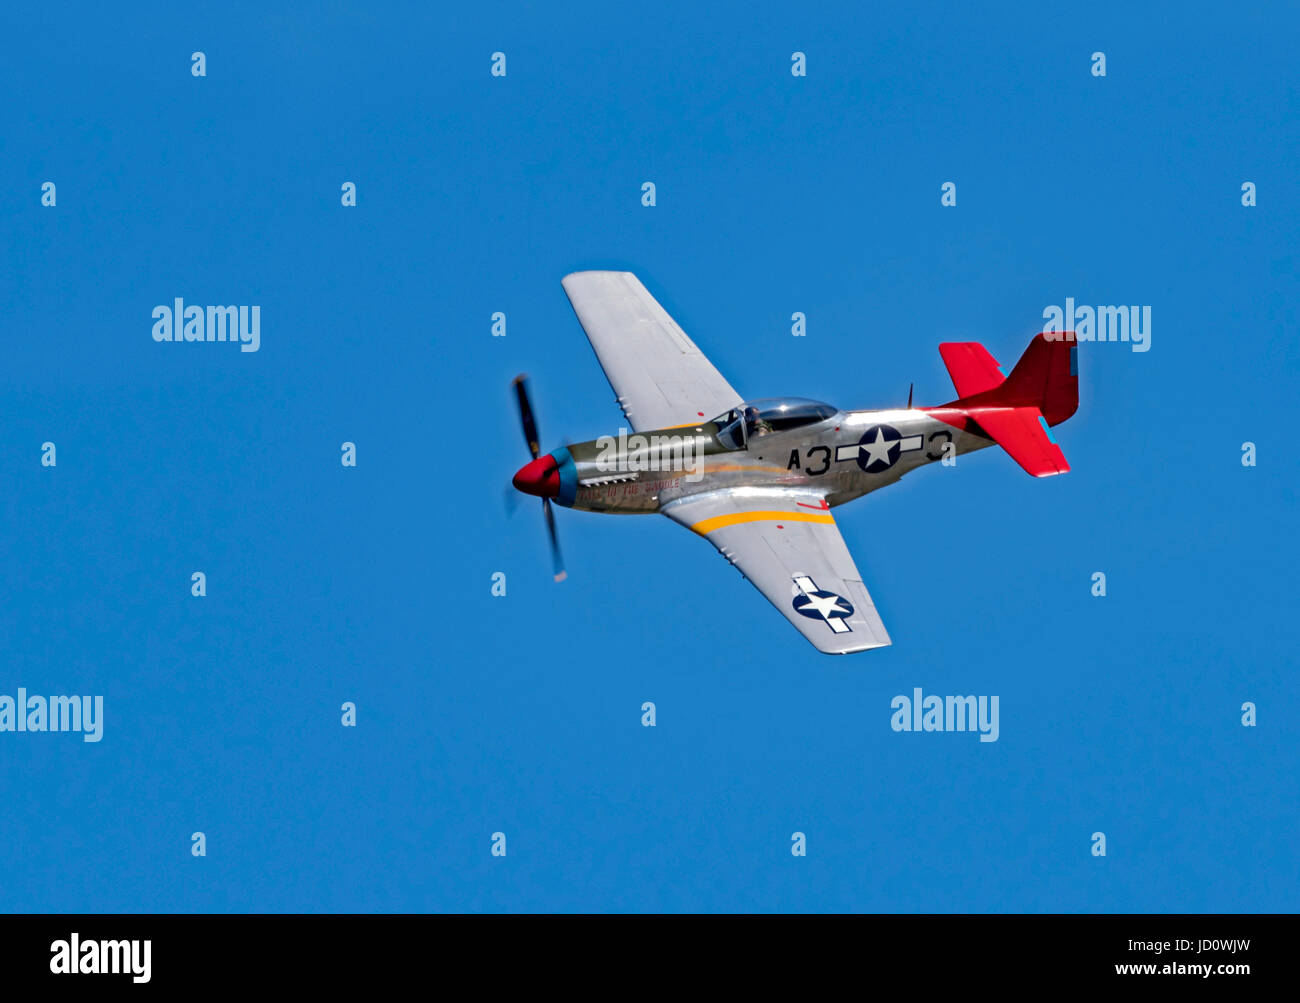 Weston-super-Mare, UK. 17th June, 2017. The P51D Mustang aircraft  'Tall In The Saddle' during its display in blue skies, on a summer day in Weston-super-Mare, UK. Credit: Bob Sharples/Alamy Live News Stock Photo